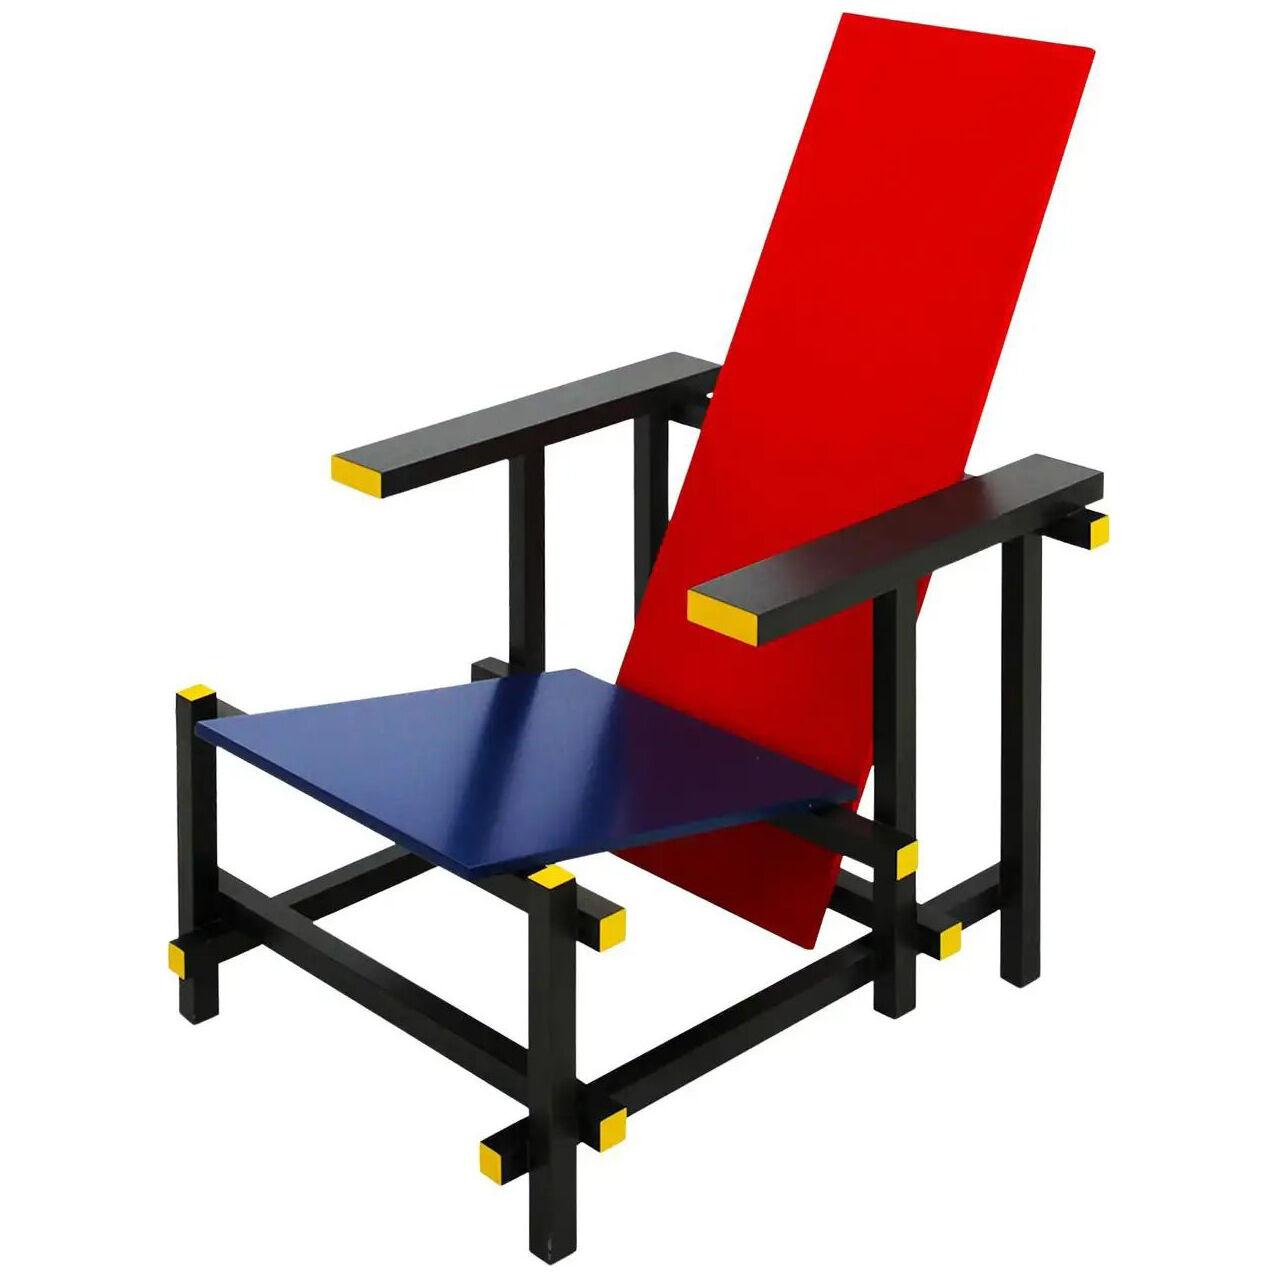 Red and Blue Chair Designed by Gerrit T. Rietveld for Cassina